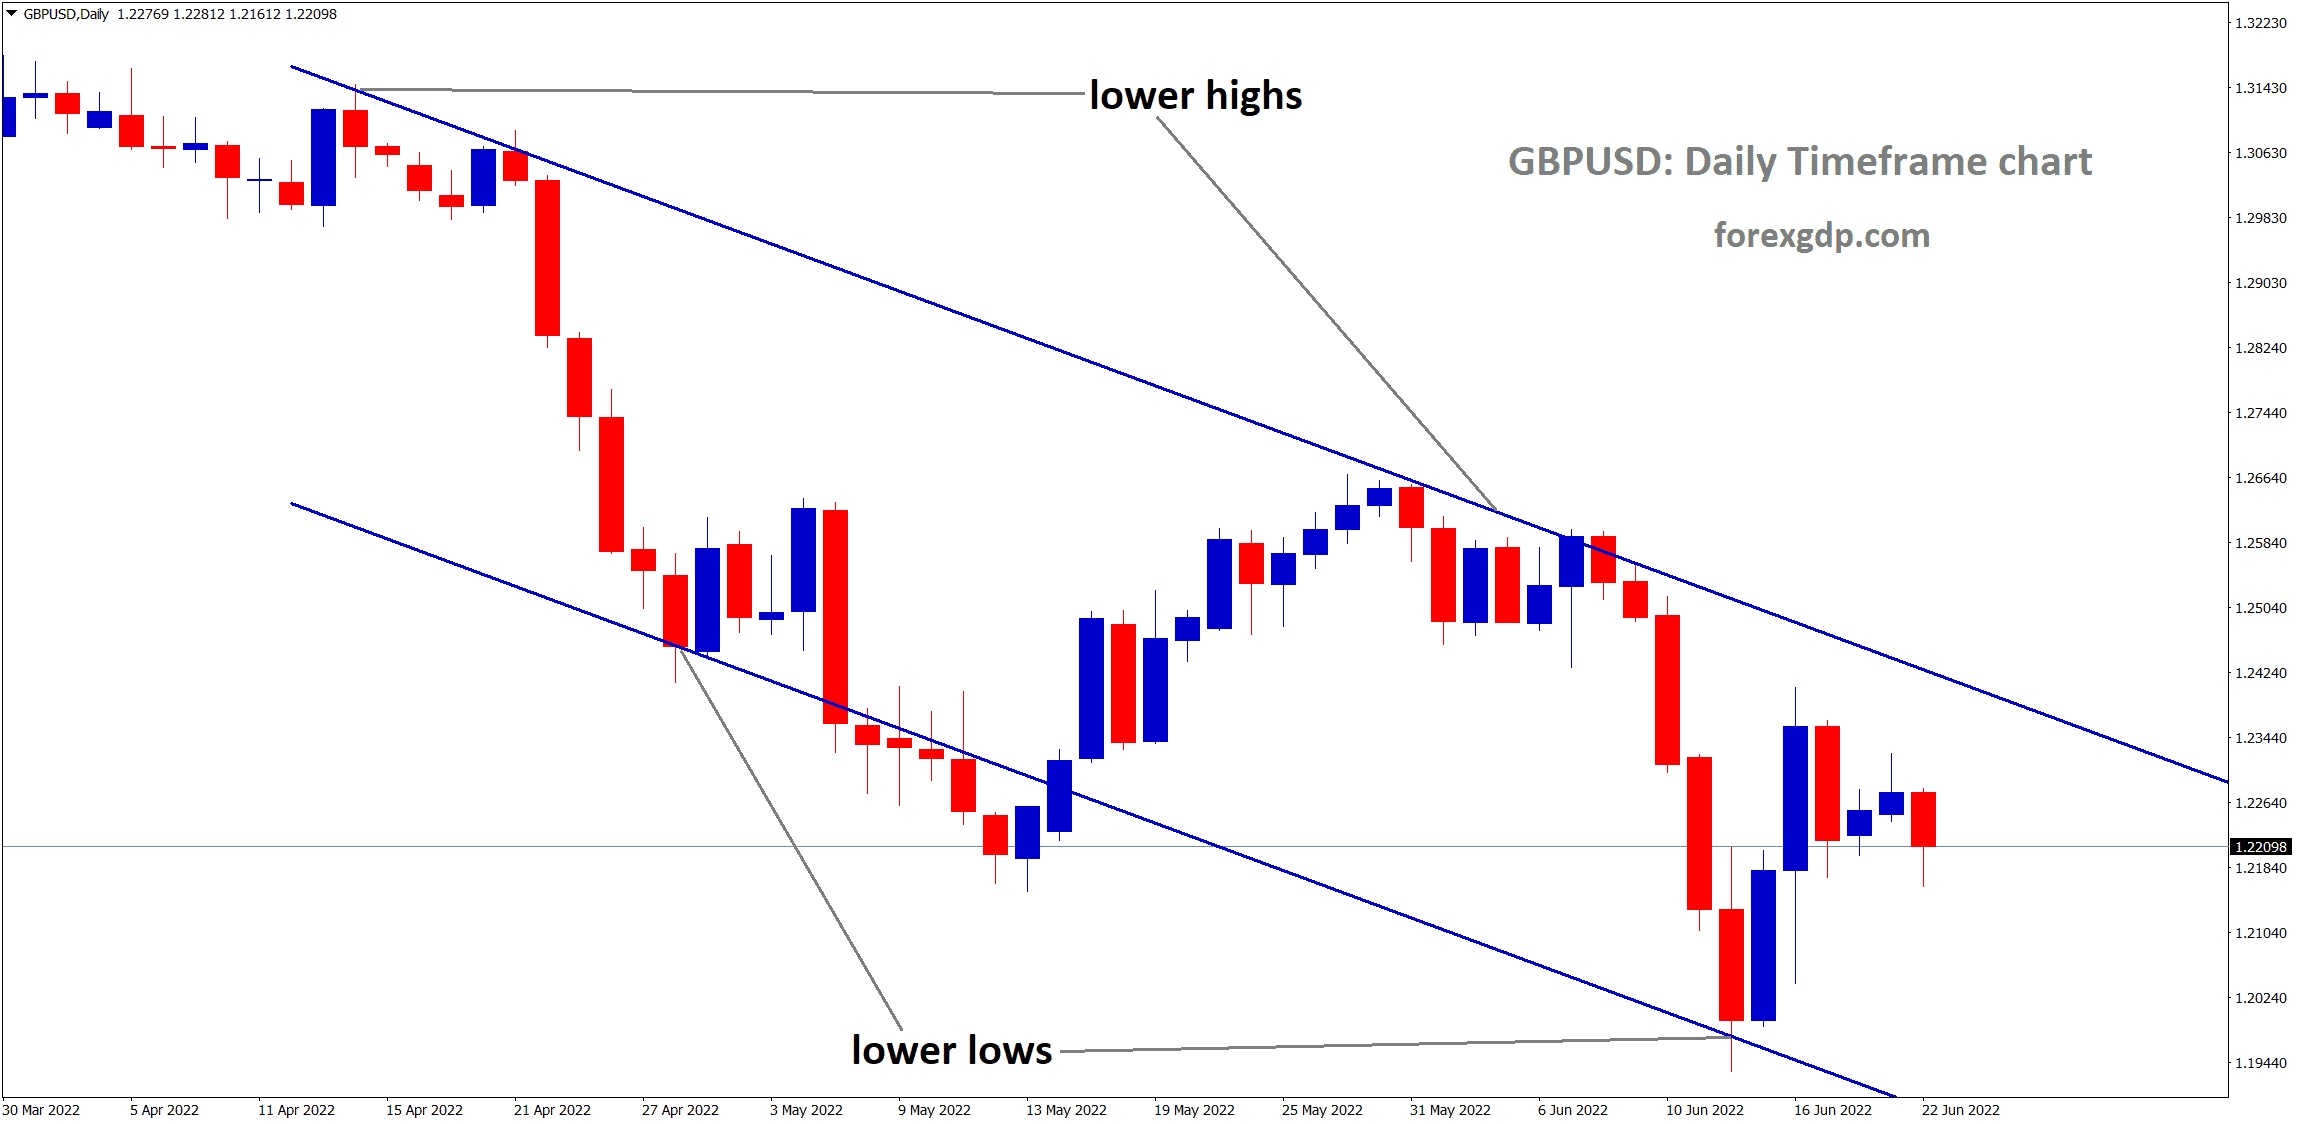 GBPUSD moving in descendig channel and the market has reached the lower high area of the channel